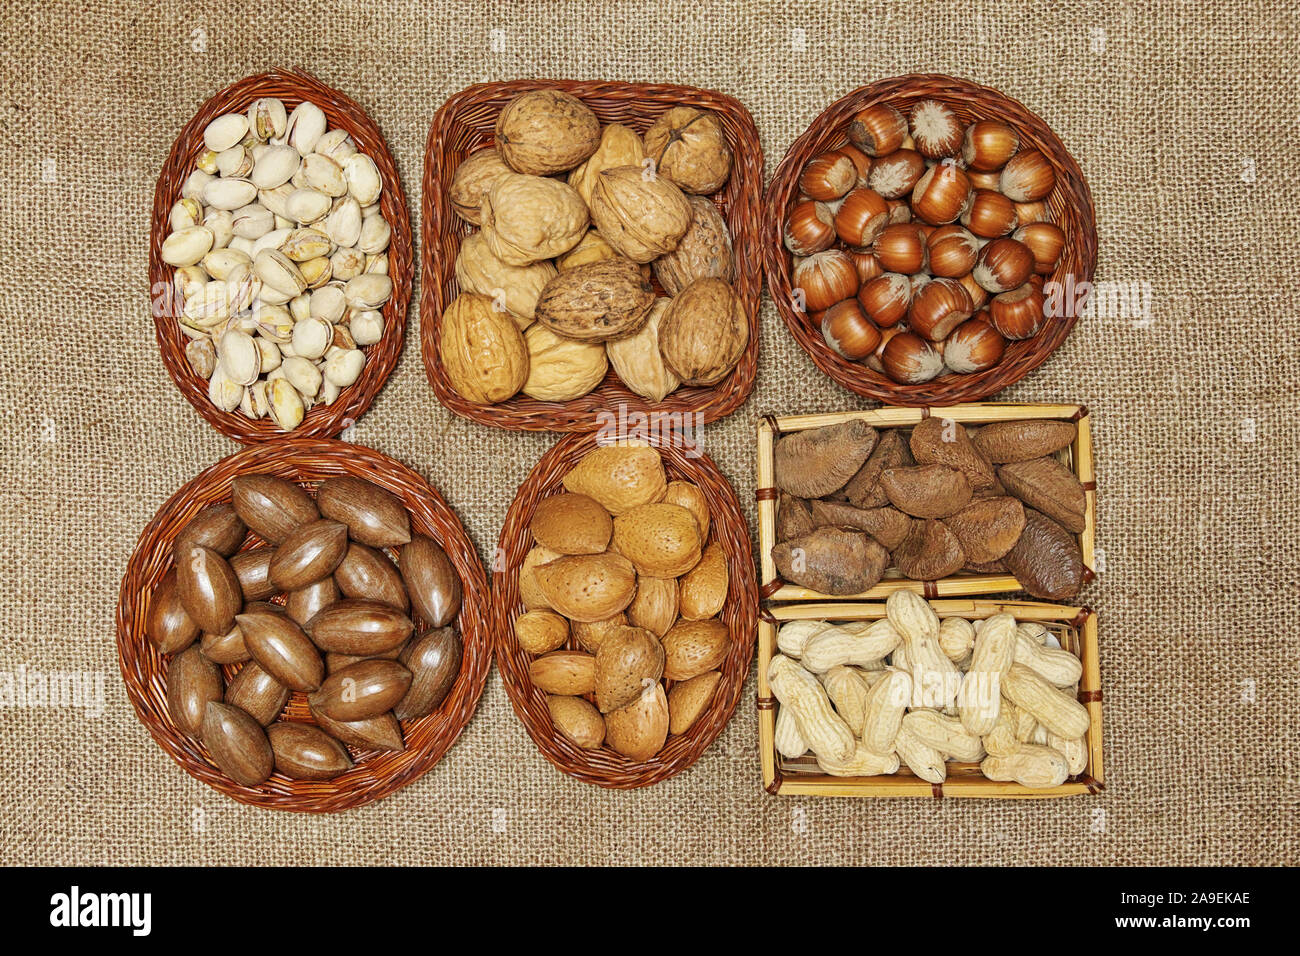 still life of edible seeds put in small baskets of different shapes Stock Photo